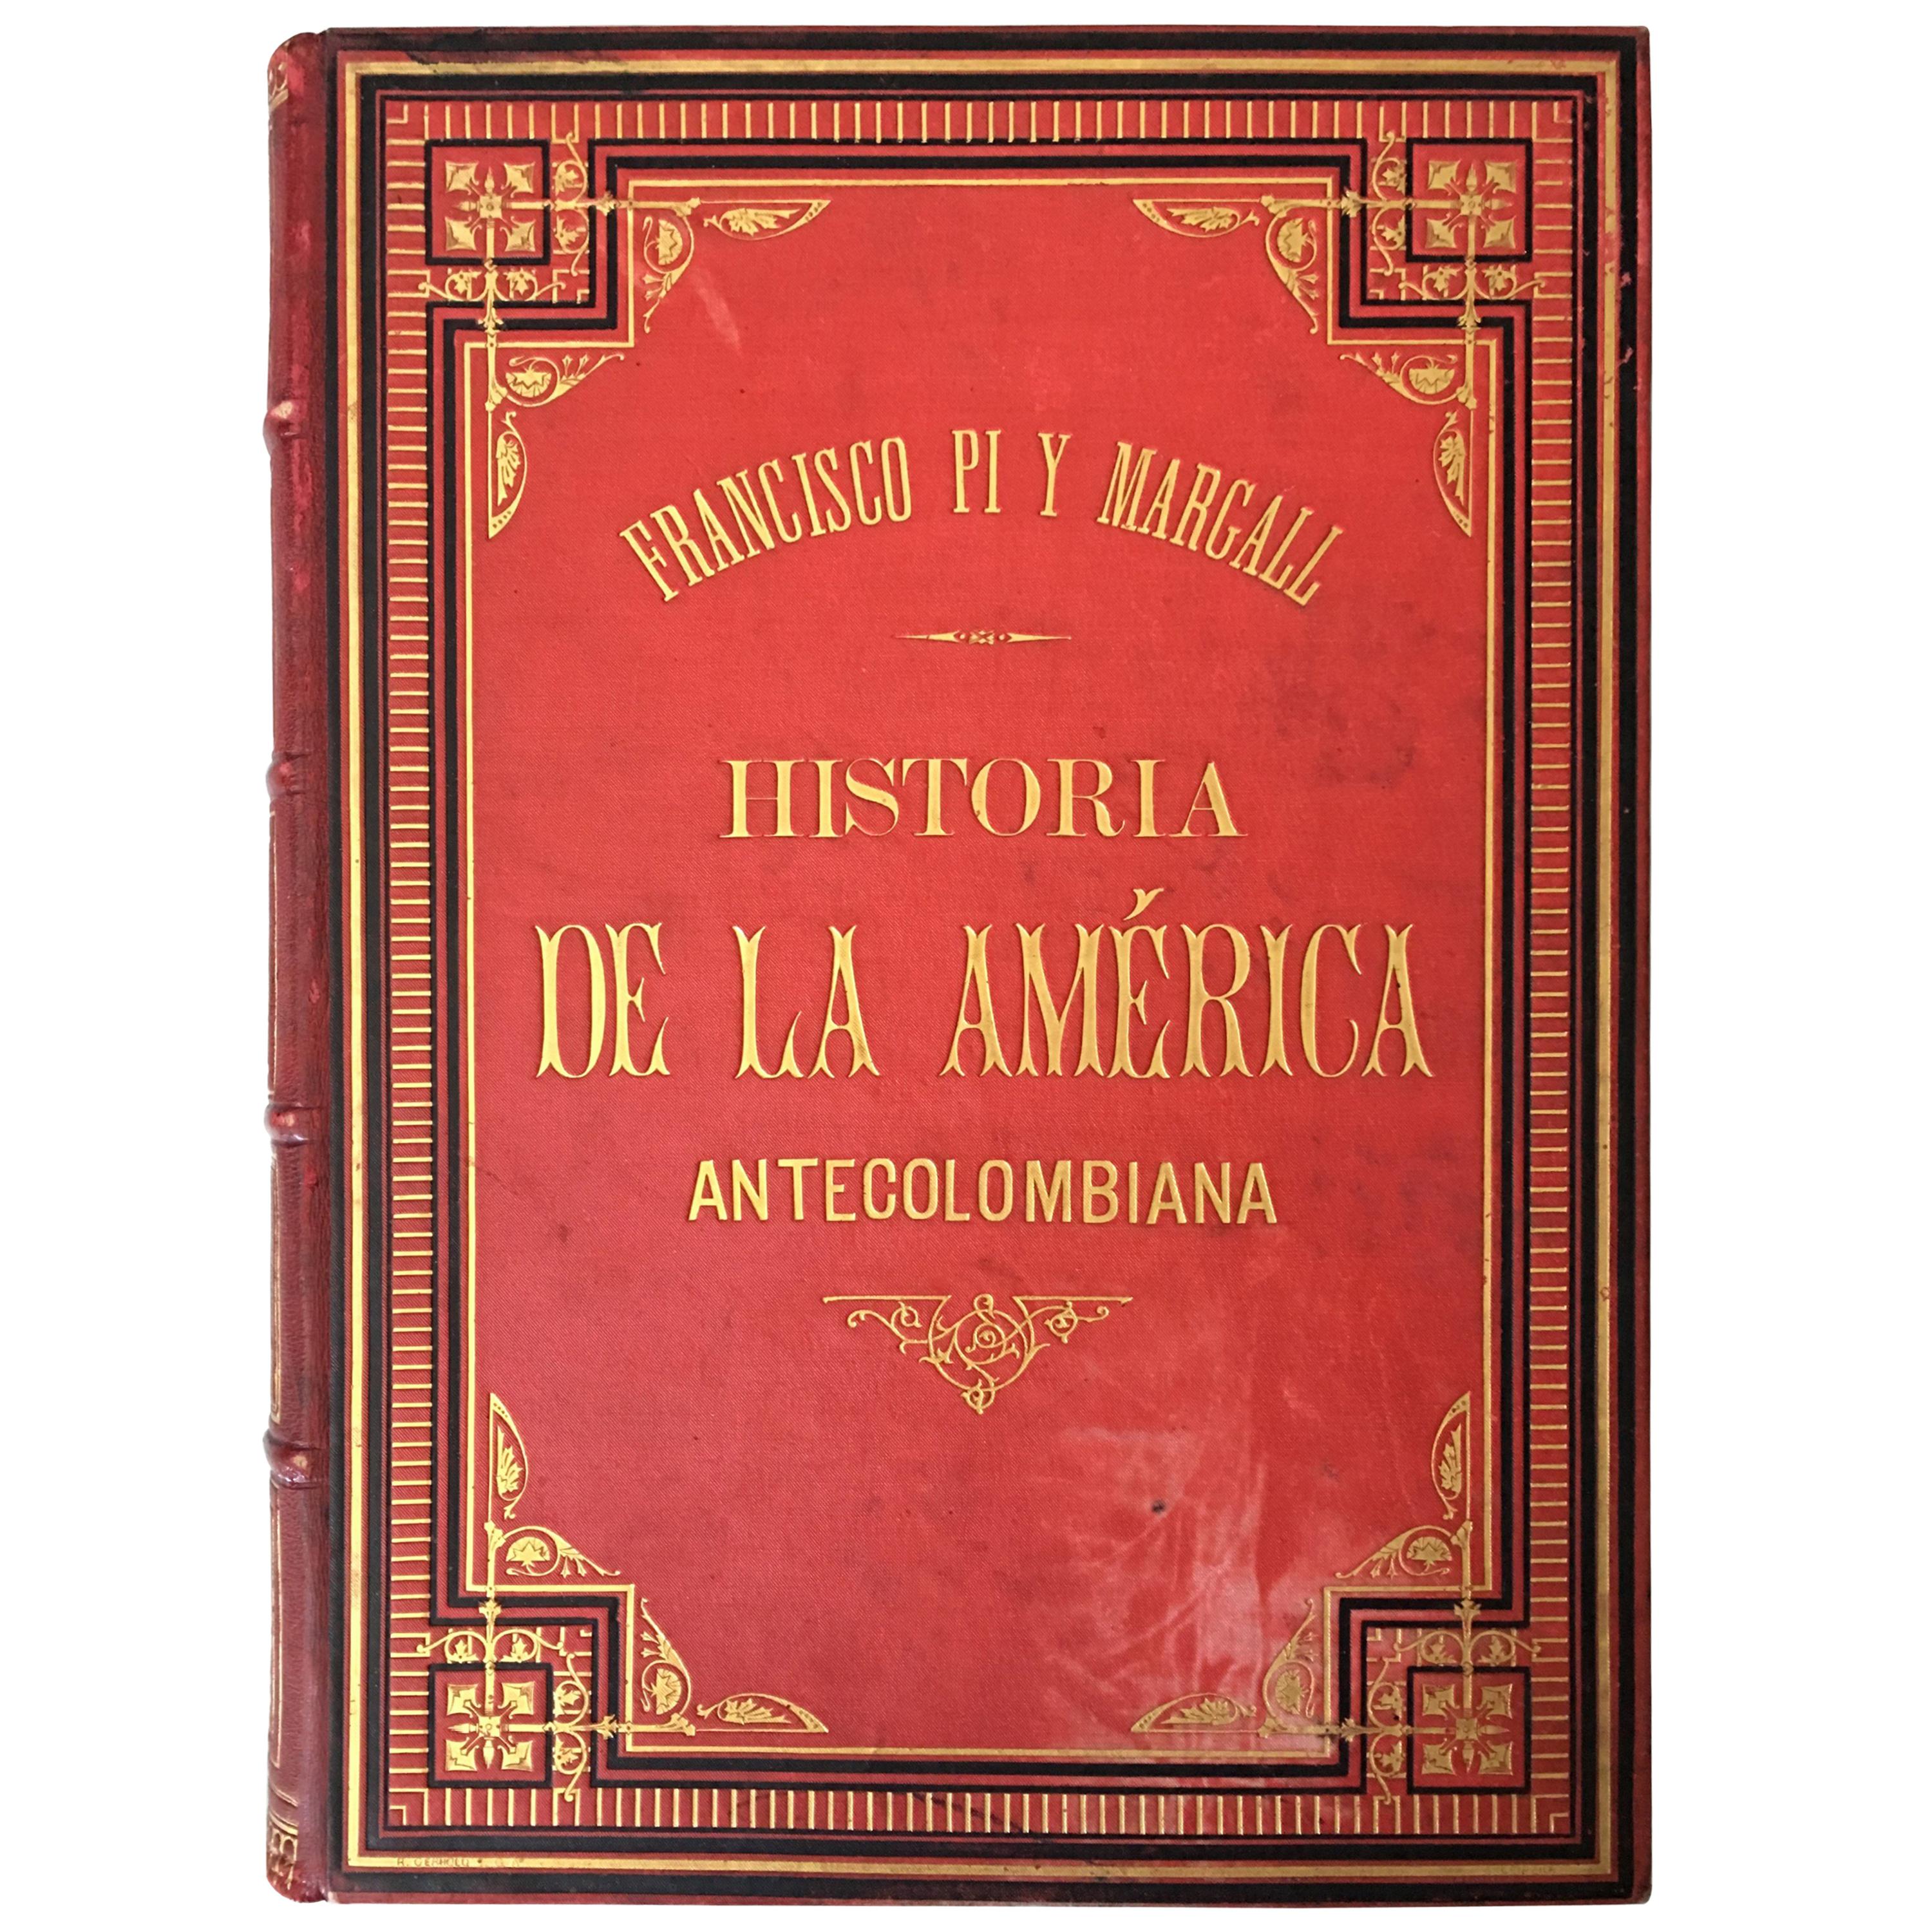 History of the Antecolombian America with Original Engravings and Pictures, 19th History of the Antecolombian America